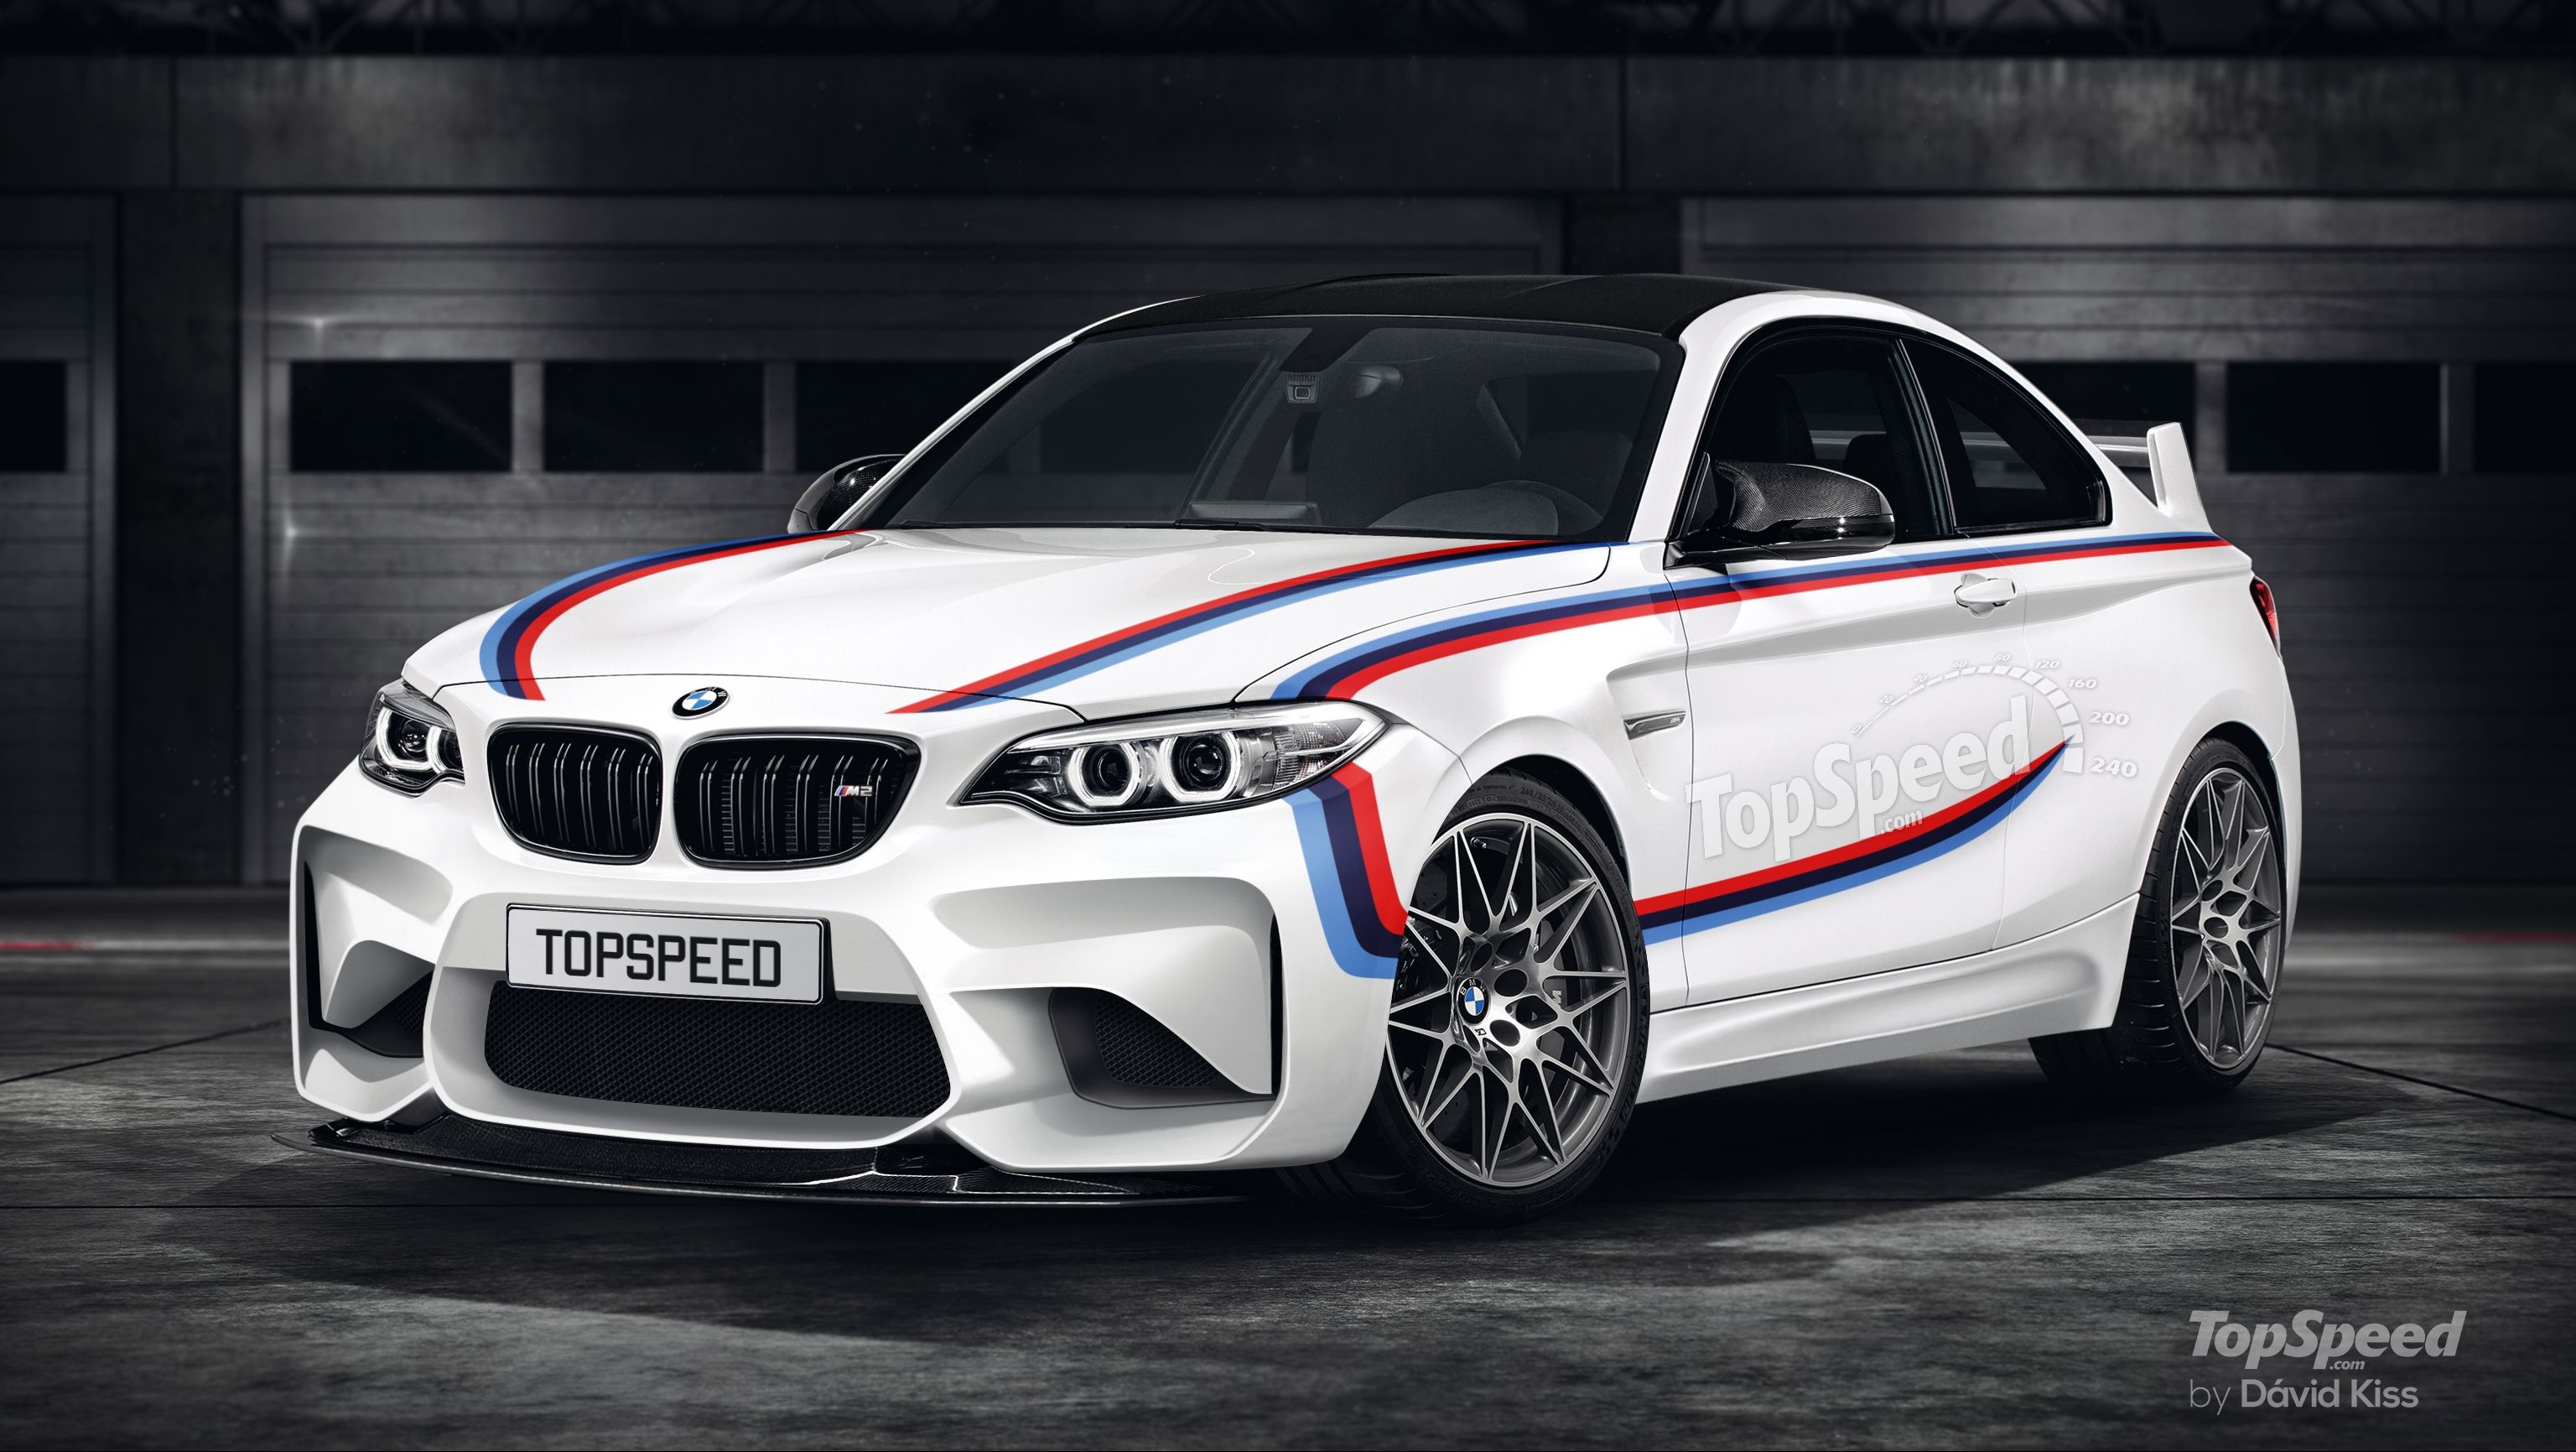 2017 BMW Could Offer An M2 CSL Because The Market Asks For It